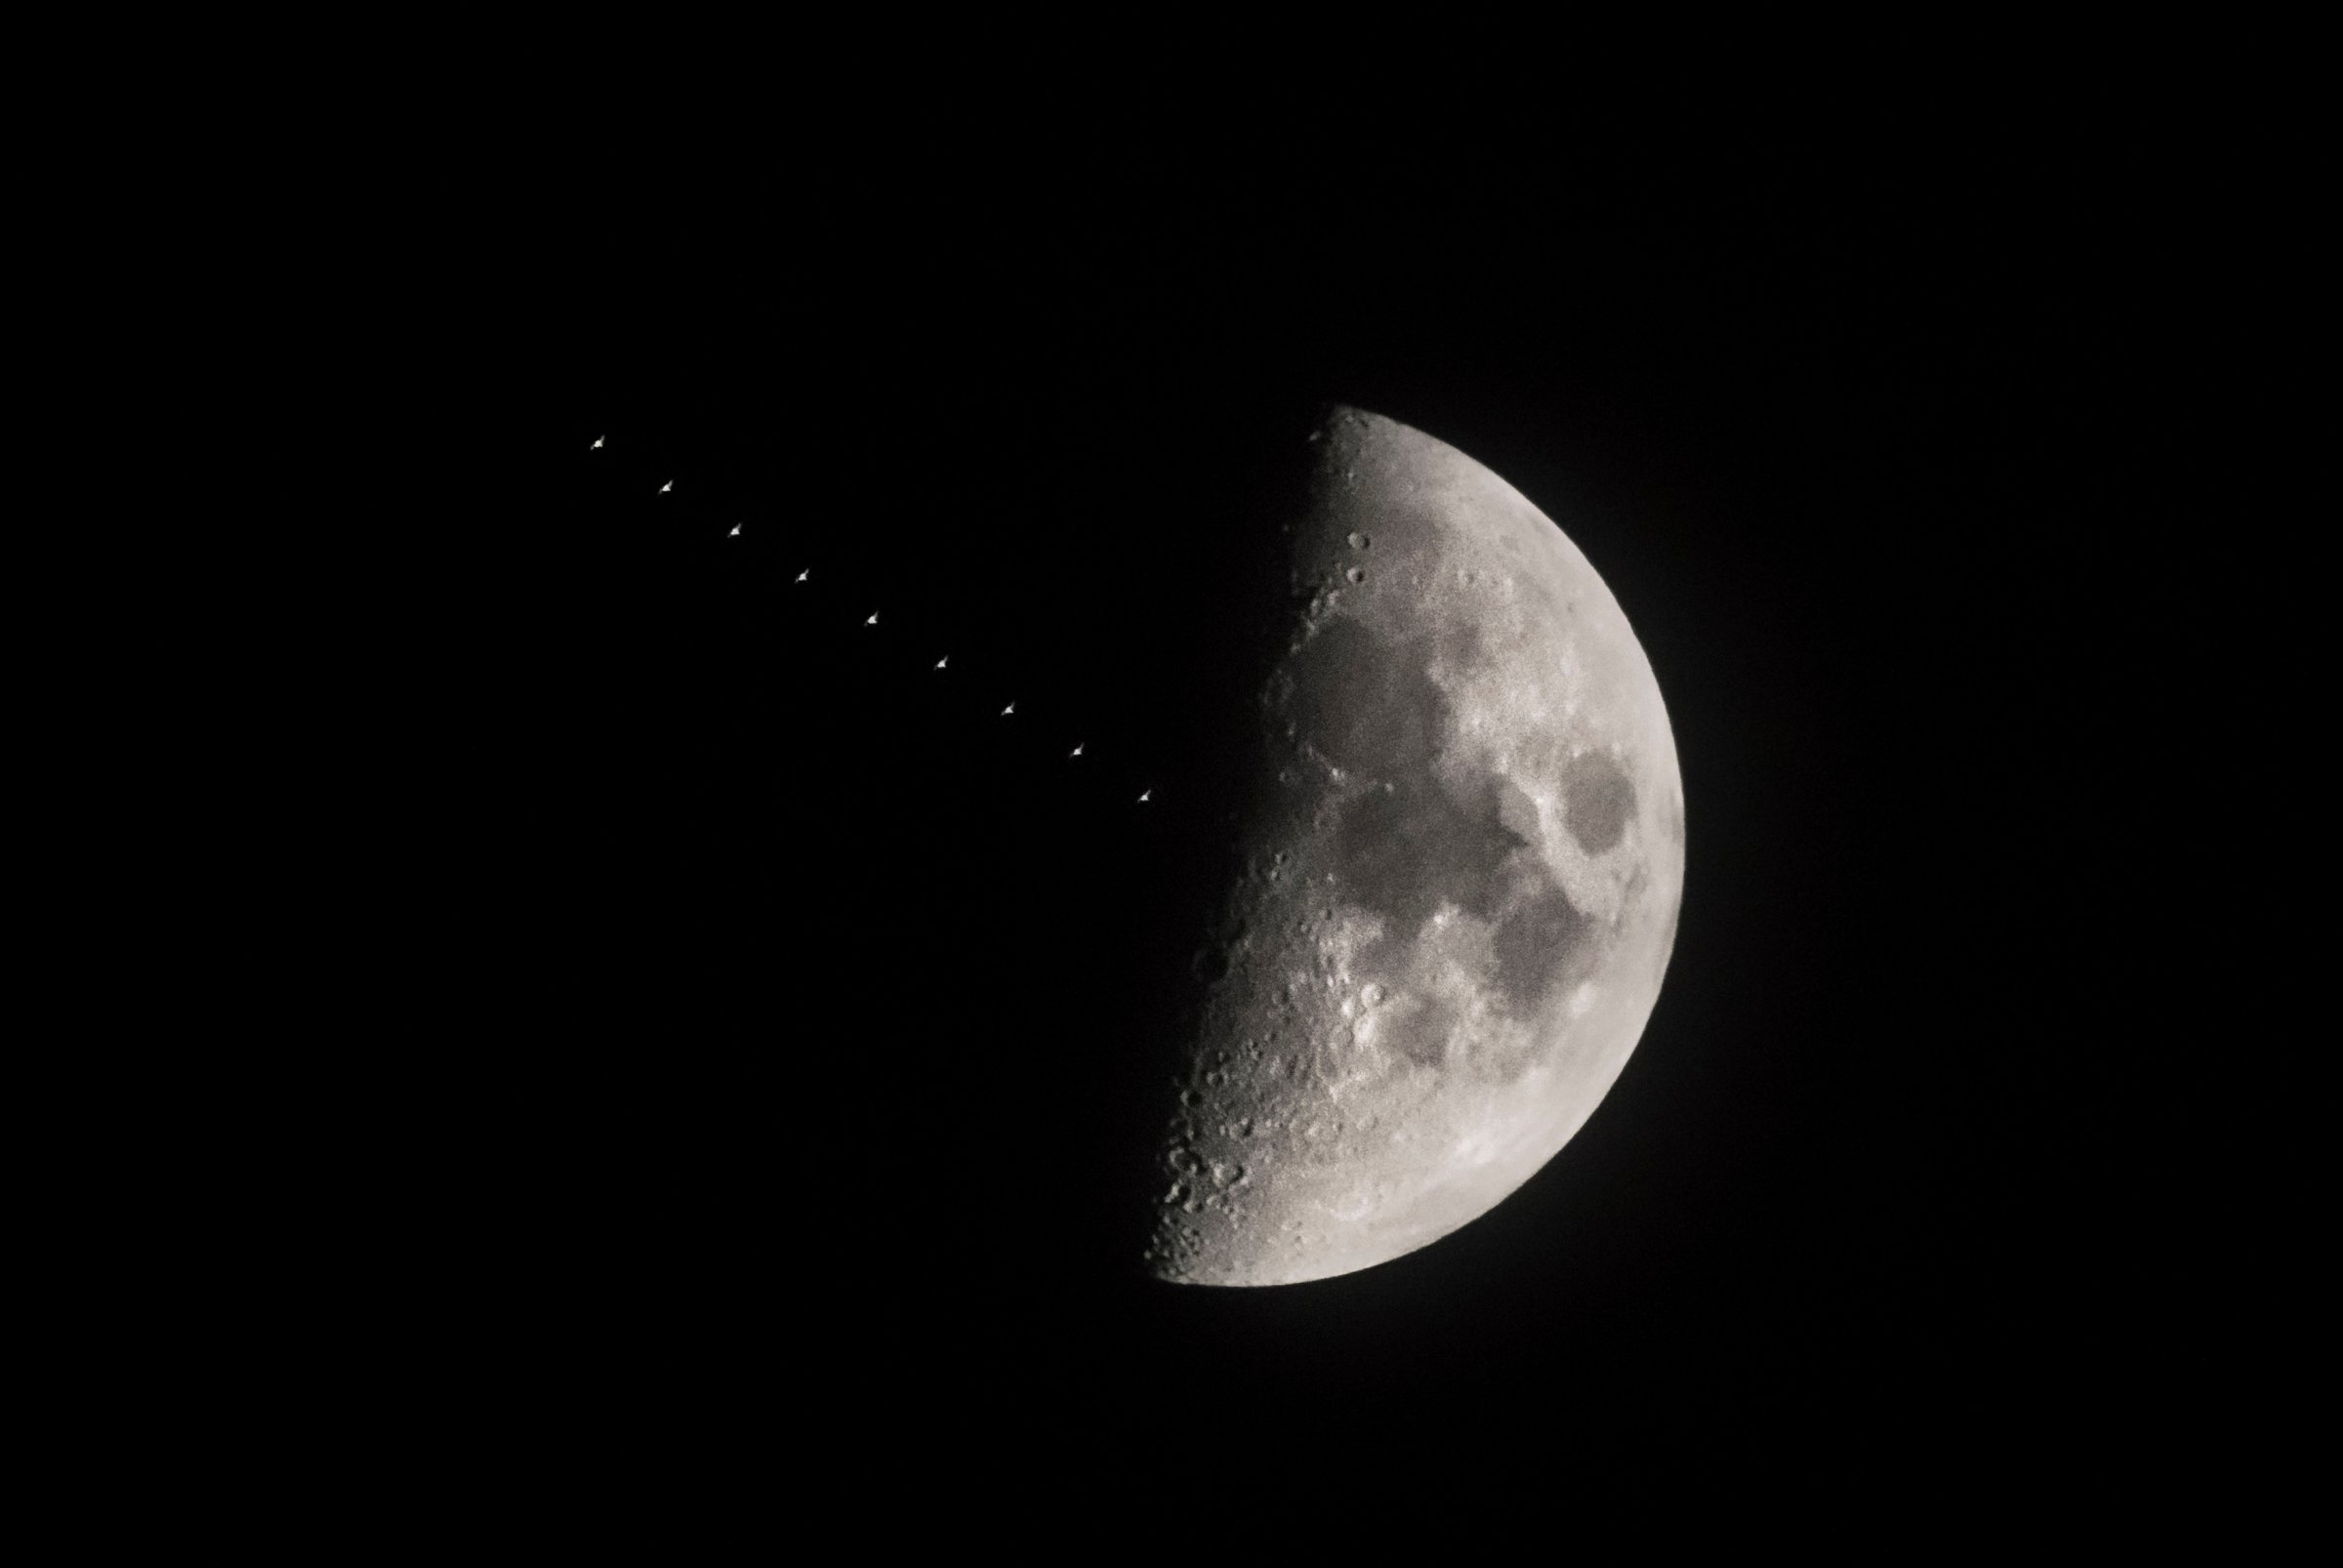 International Space Station transits the moon